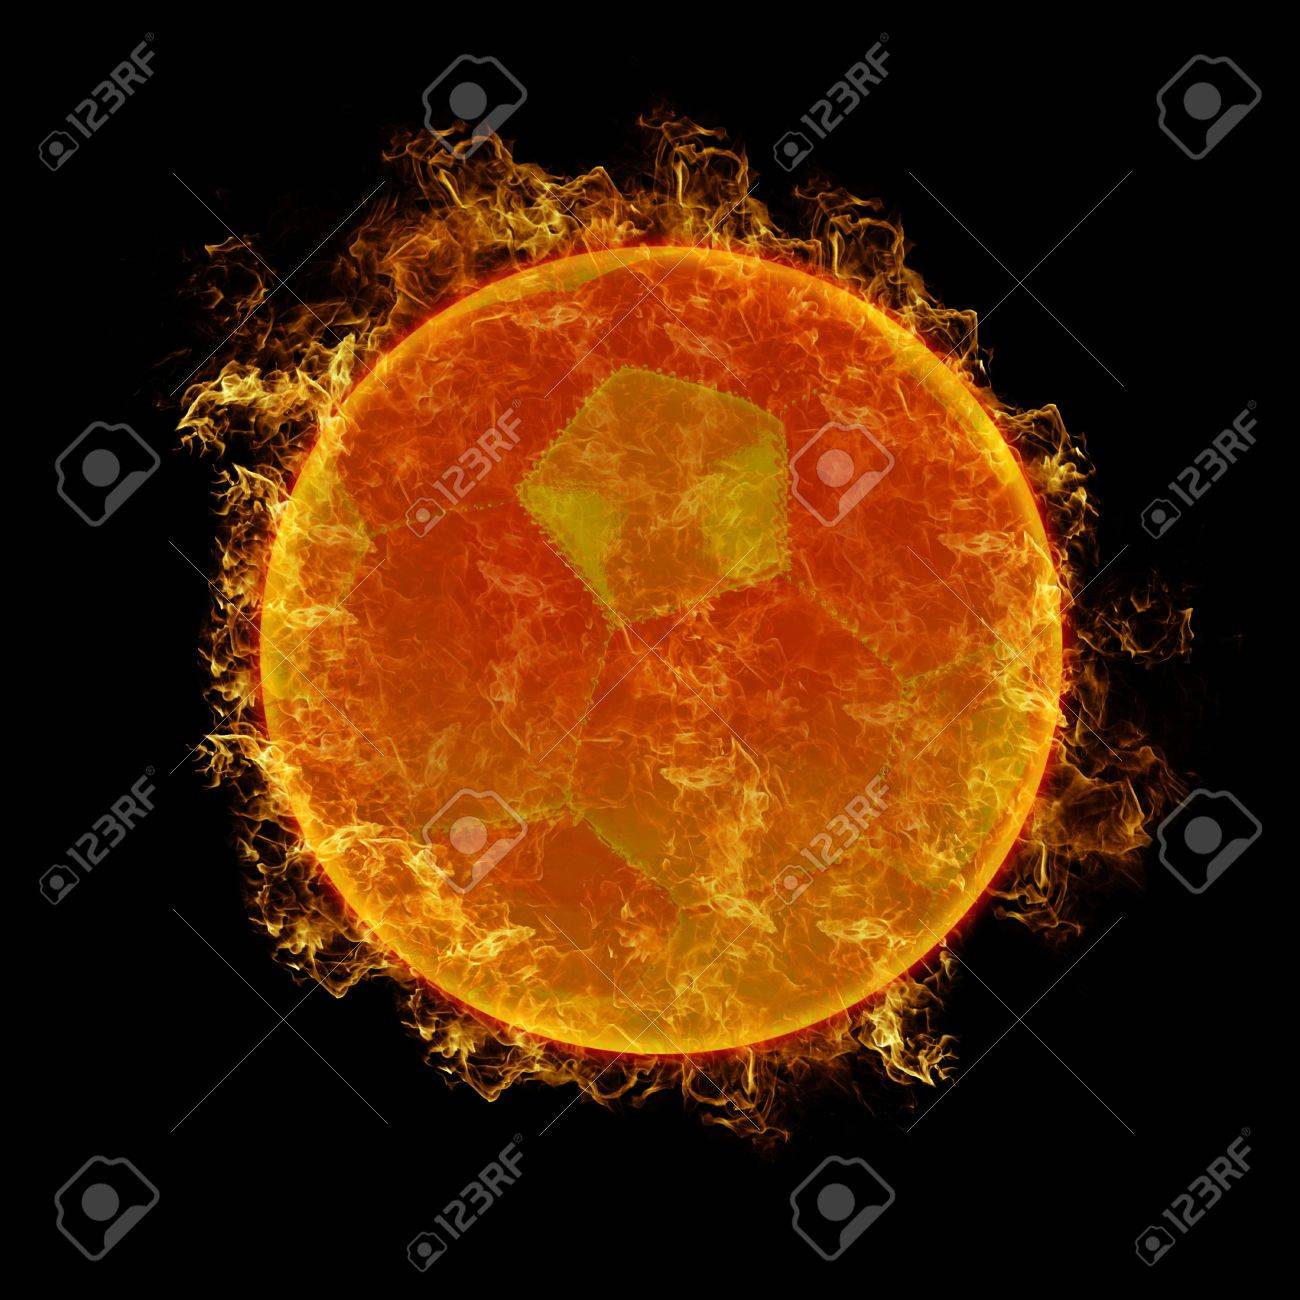 Soccer Ball On A Black Fire Background Stock Photo Picture And